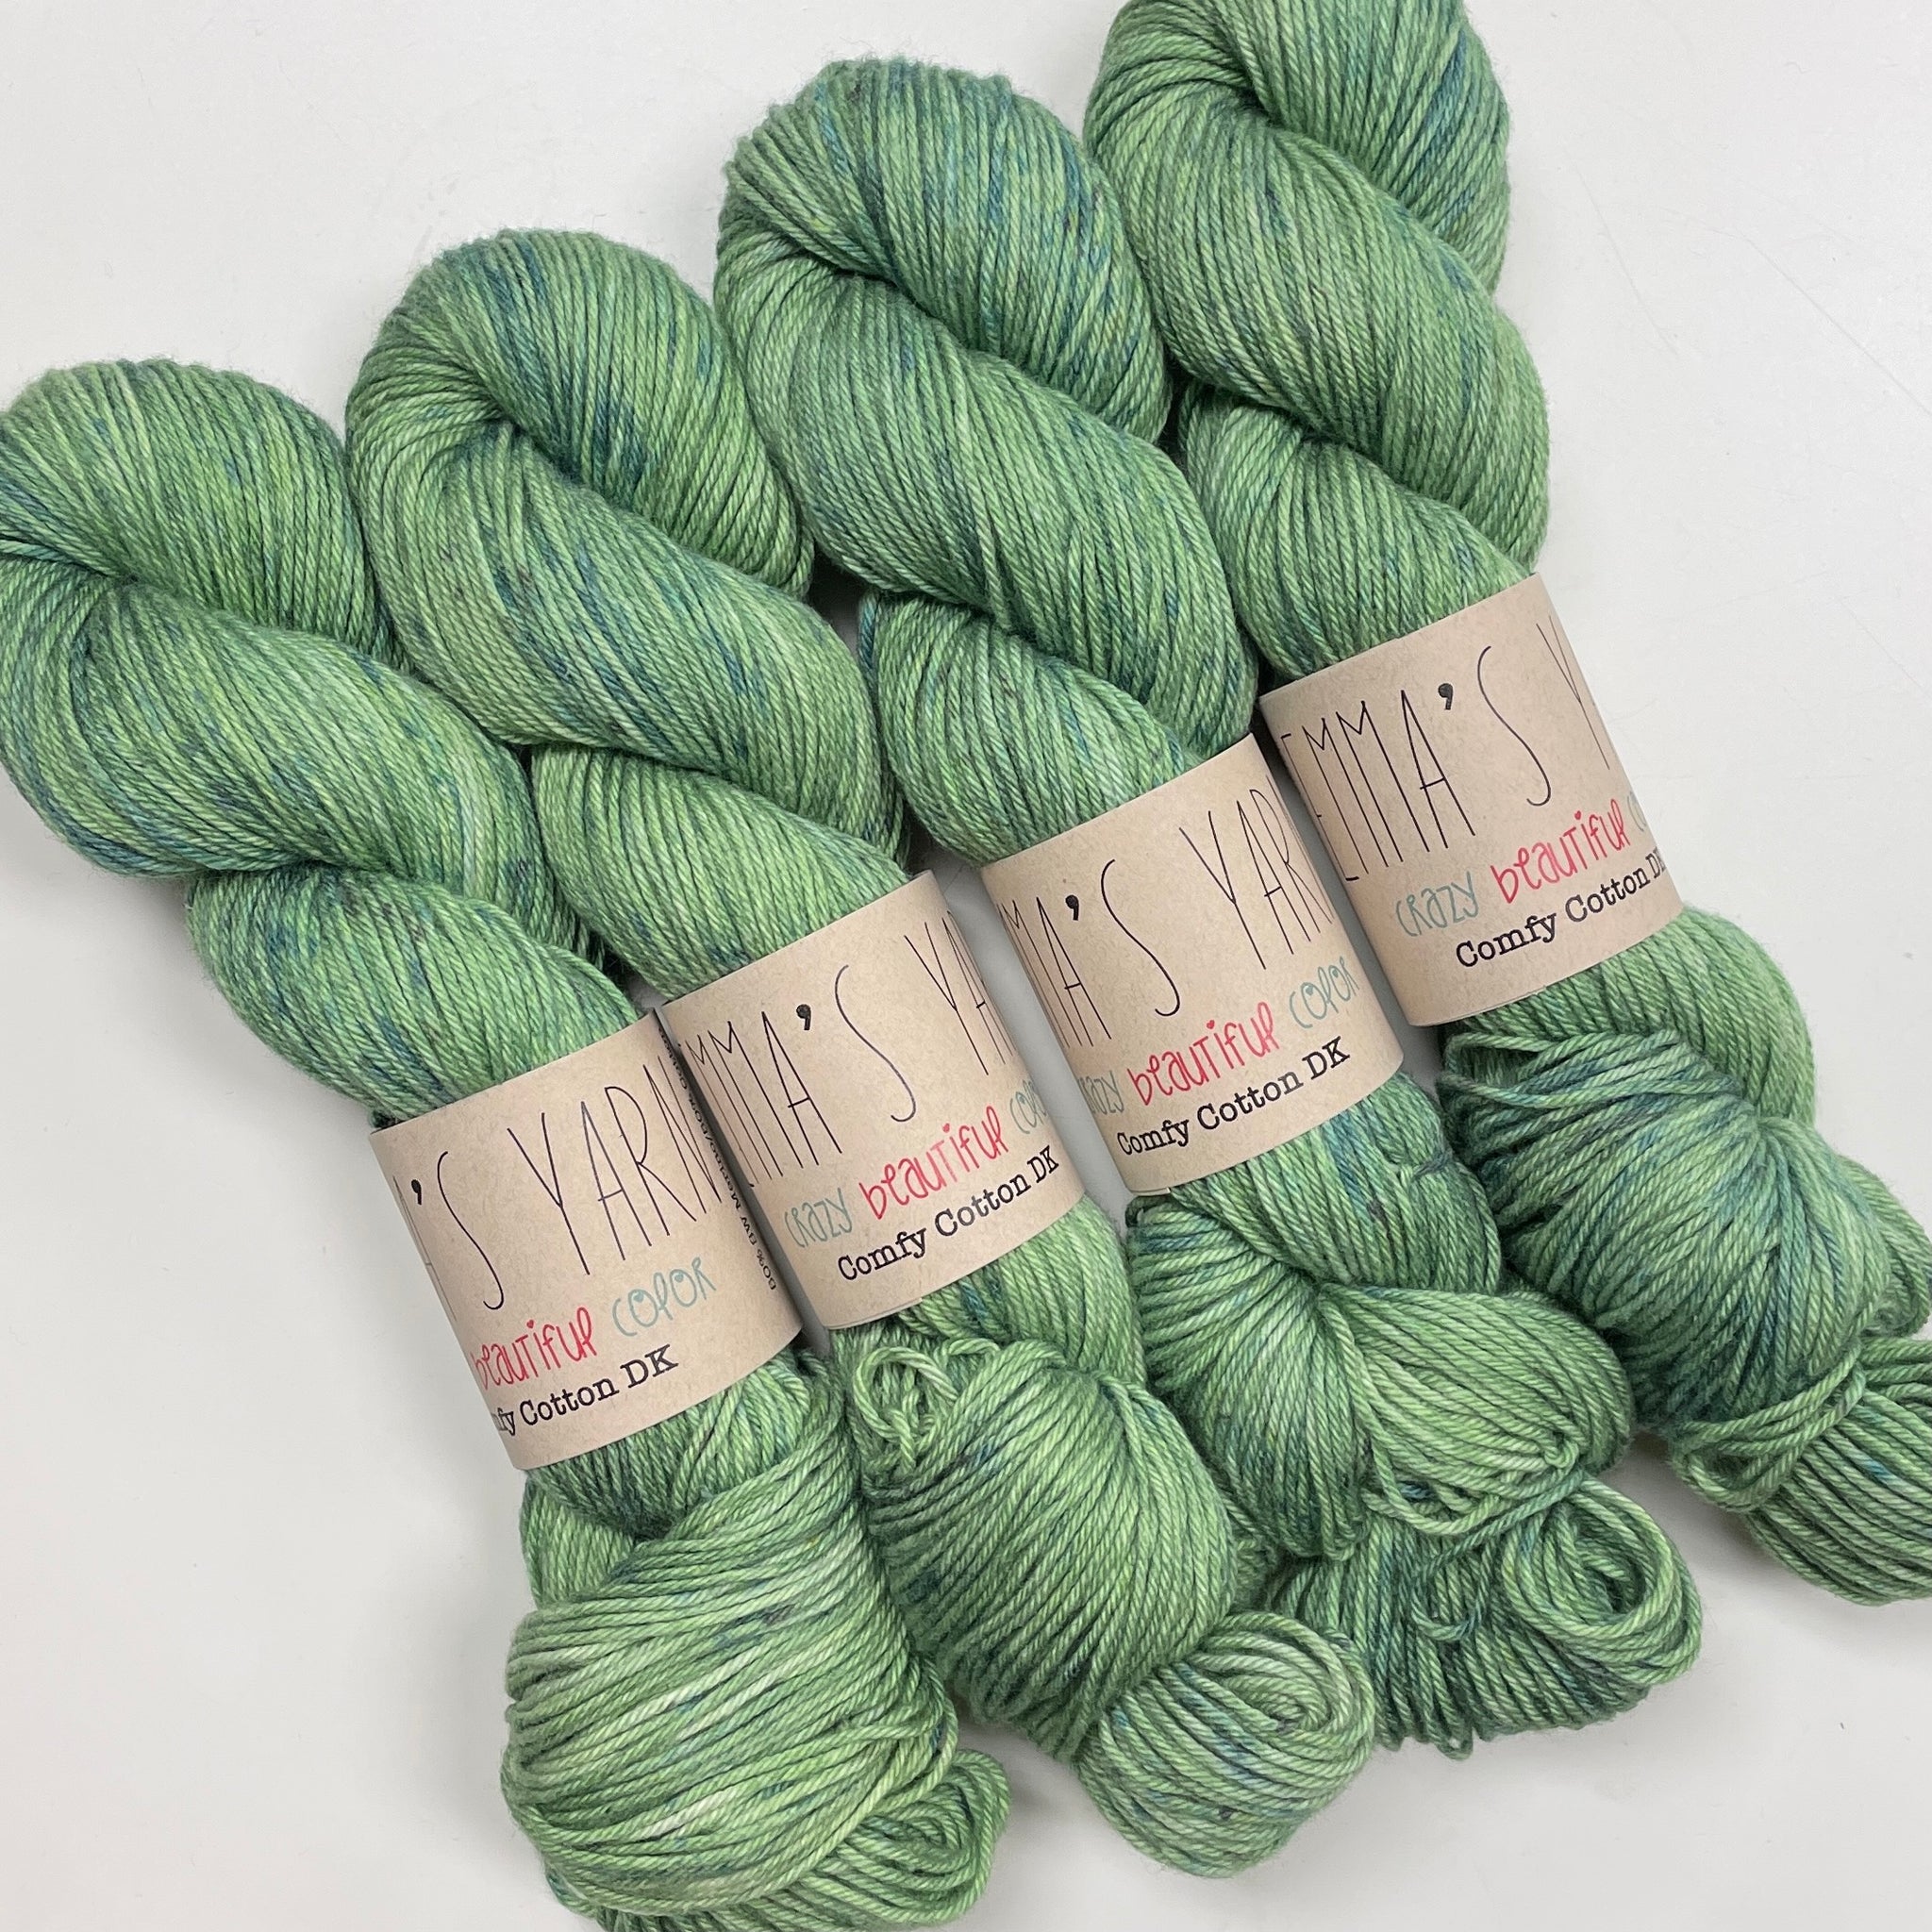 It's Not Easy Being Green - Comfy Cotton DK (6)